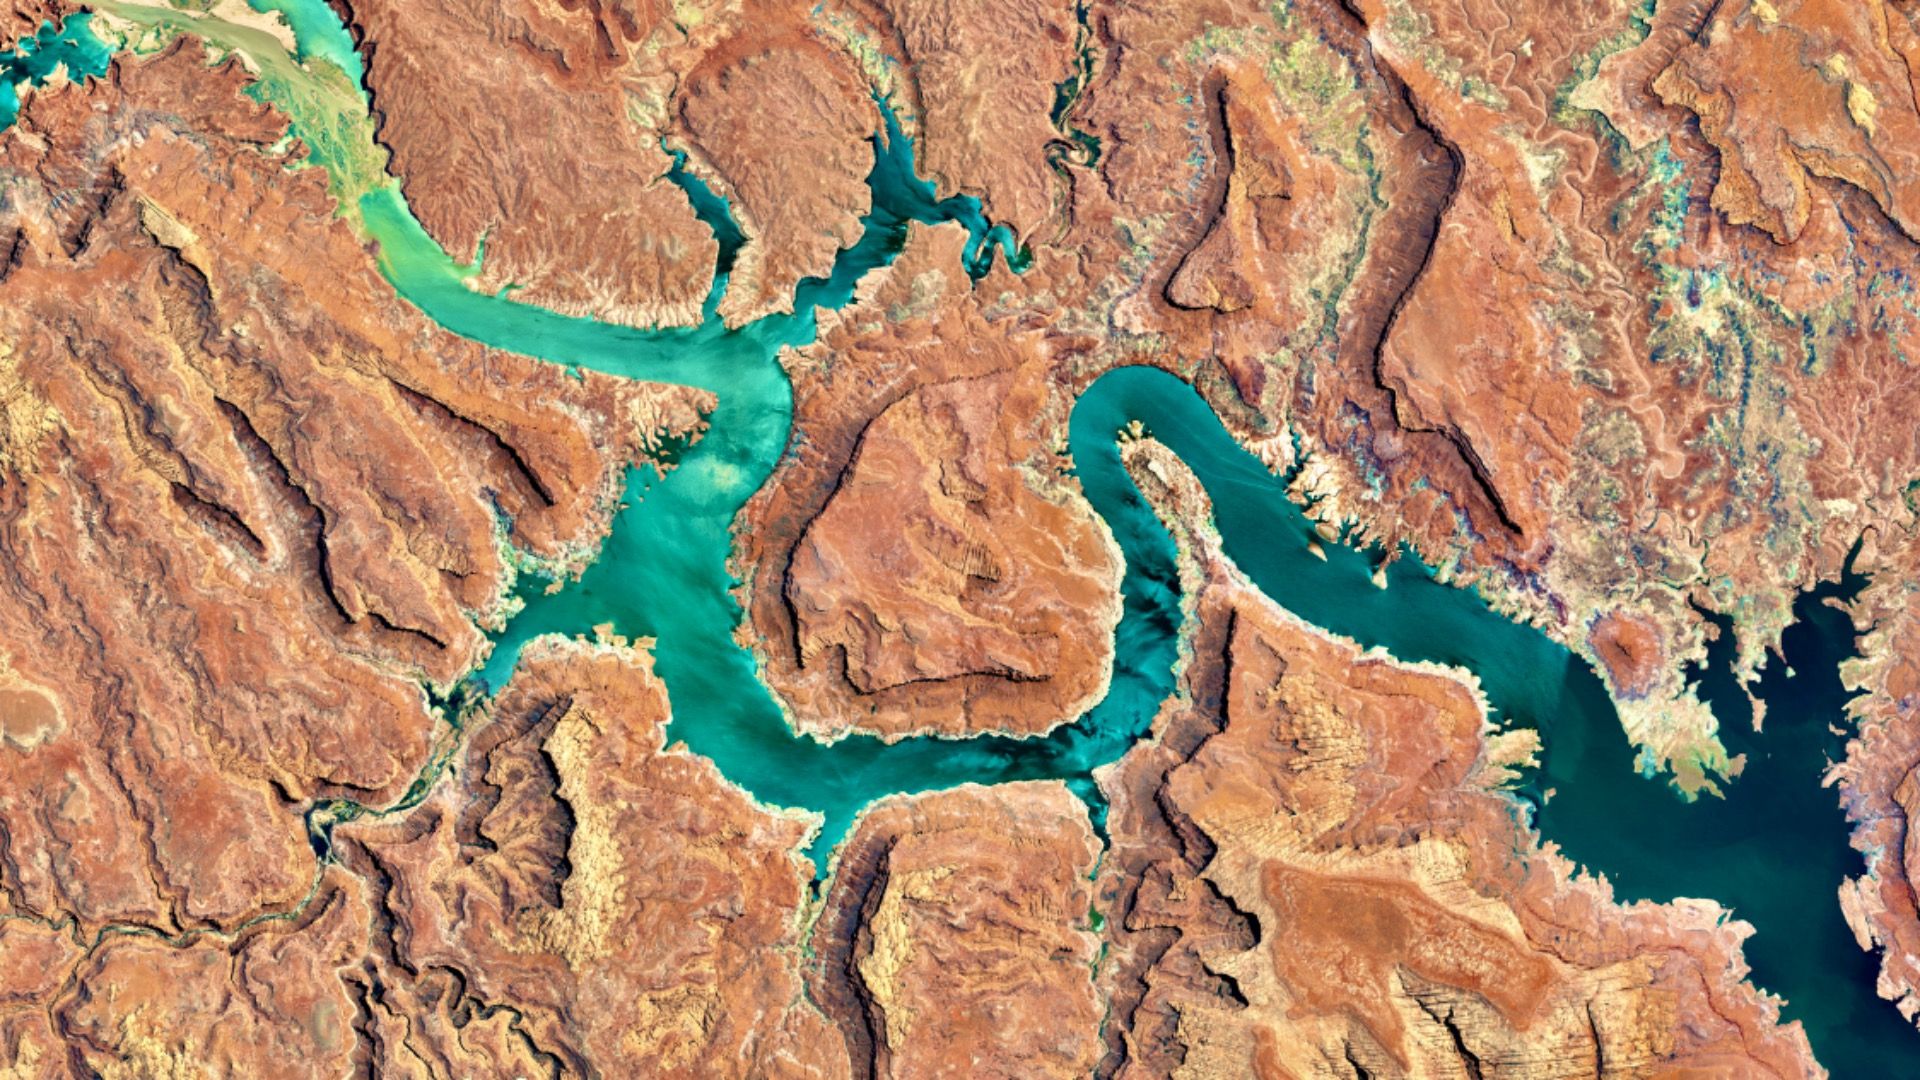 Colorado River, Lake Powell and Trachyte Canyon looking down aerial view from above – Bird’s eye view Colorado River, Utah, USA